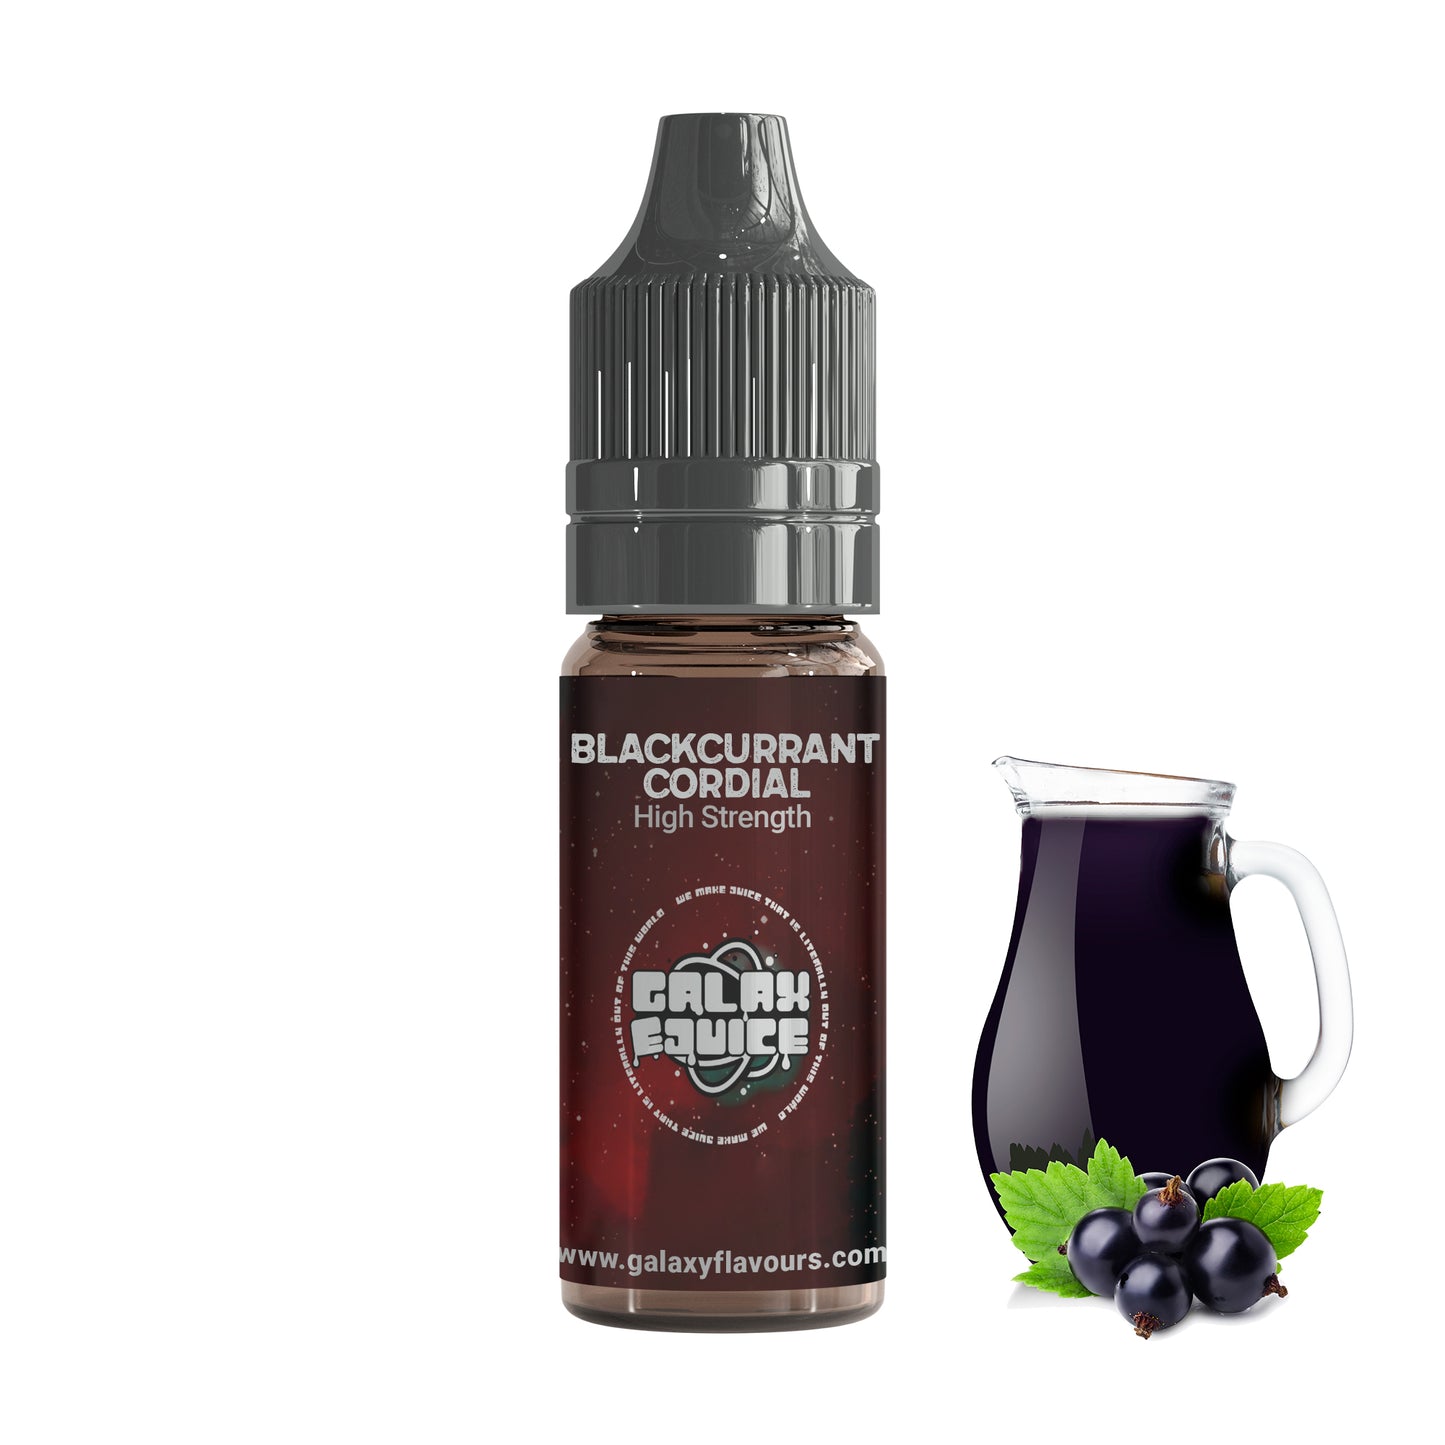 Blackcurrant Cordial High Strength Professional Flavouring.